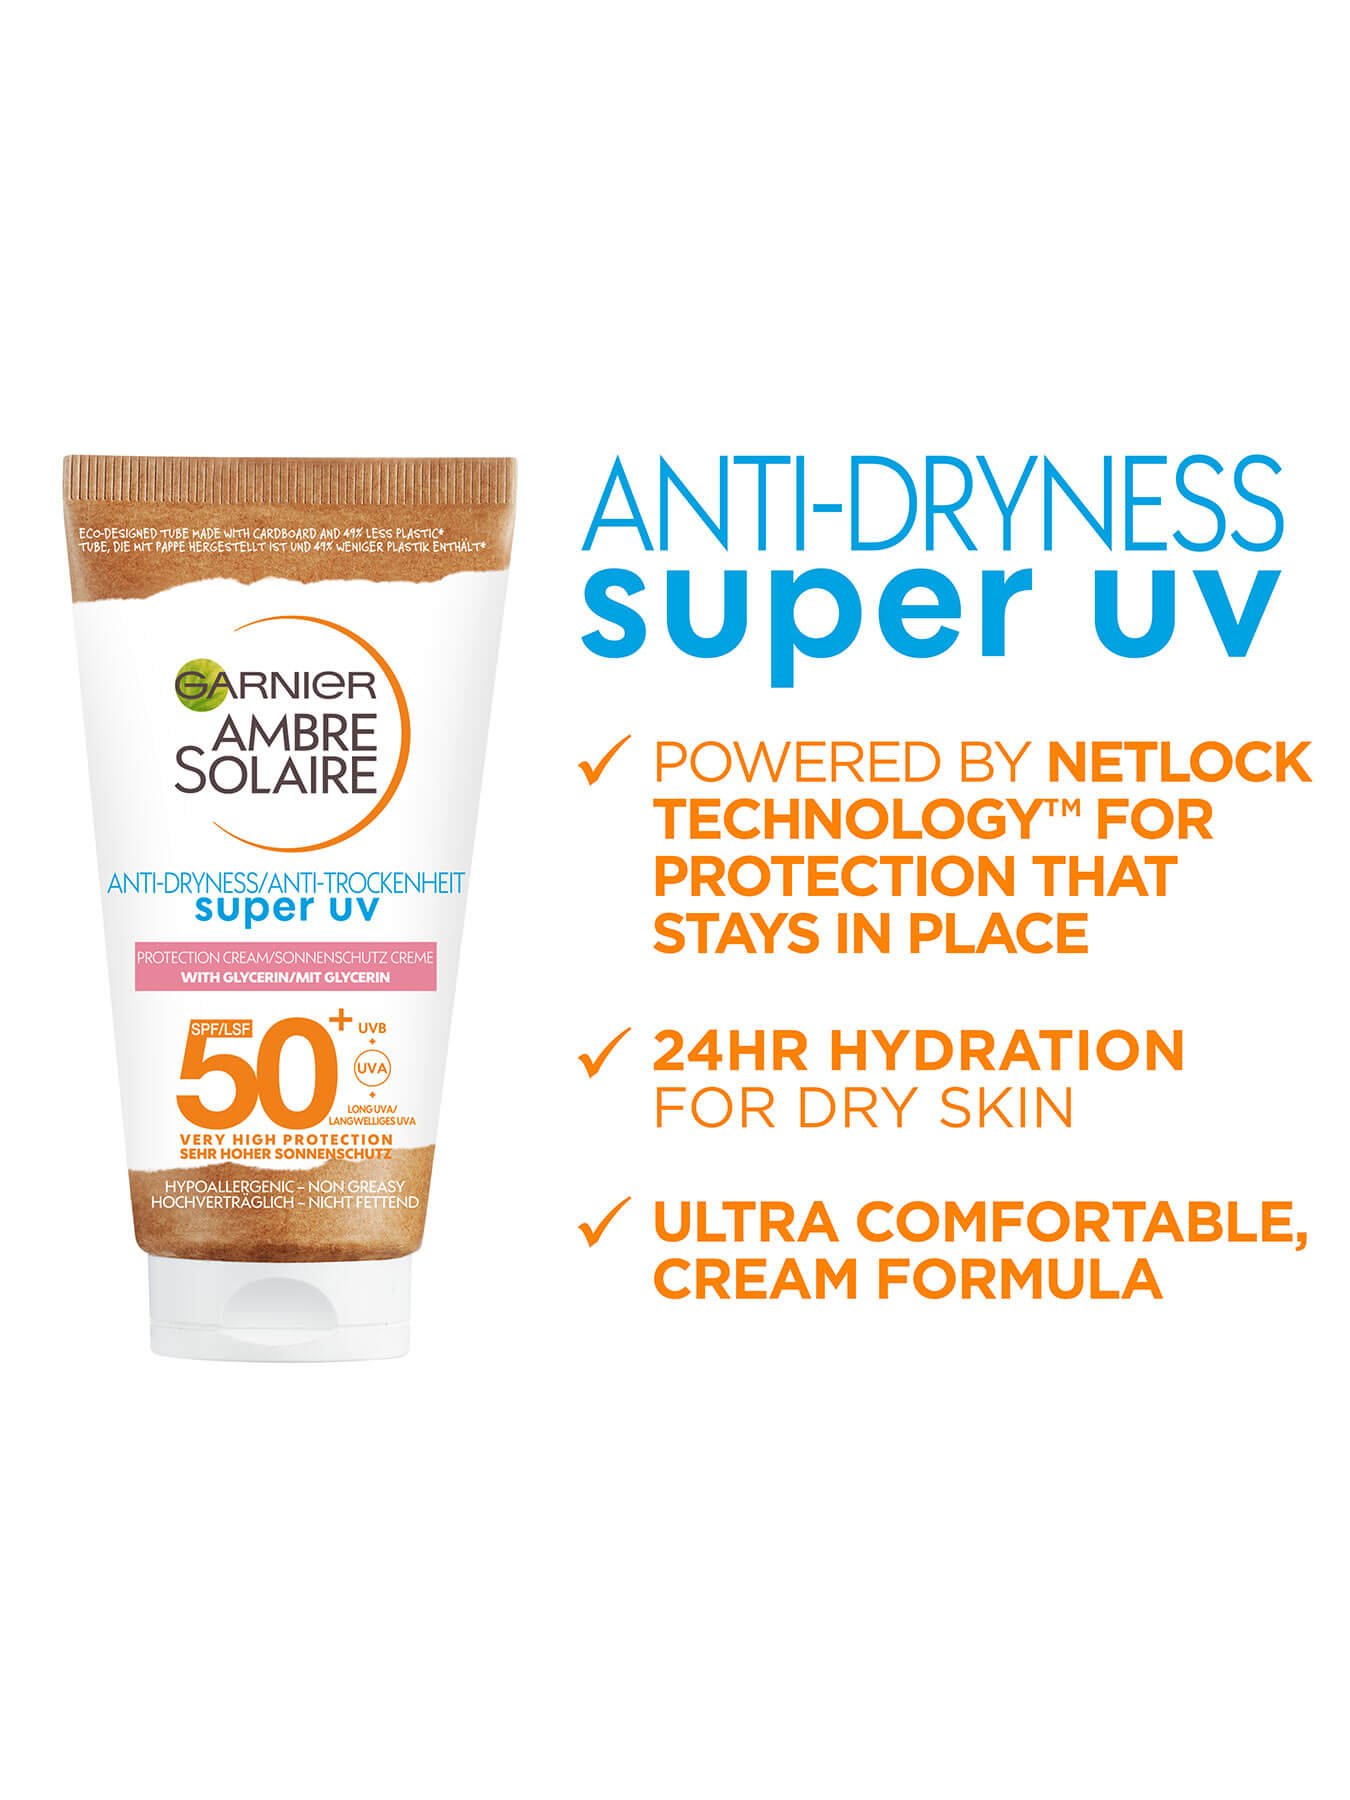 Super UV Ambre Solaire Anti Dryness benefits listed